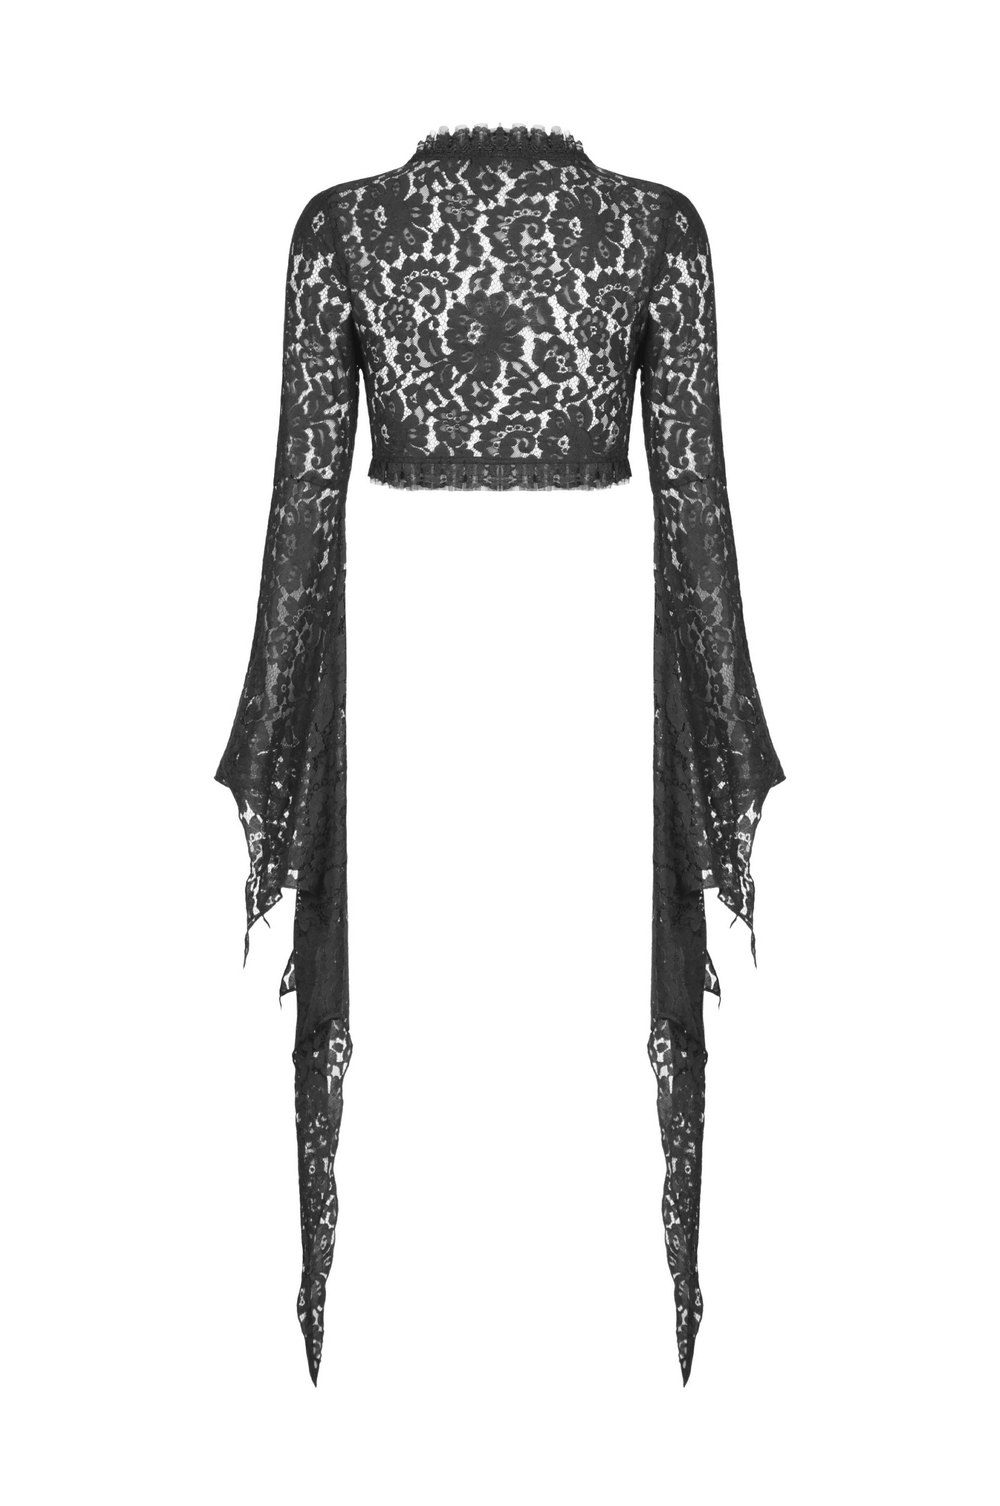 Black Lace Bolero Shrug Top with Bell Sleeves